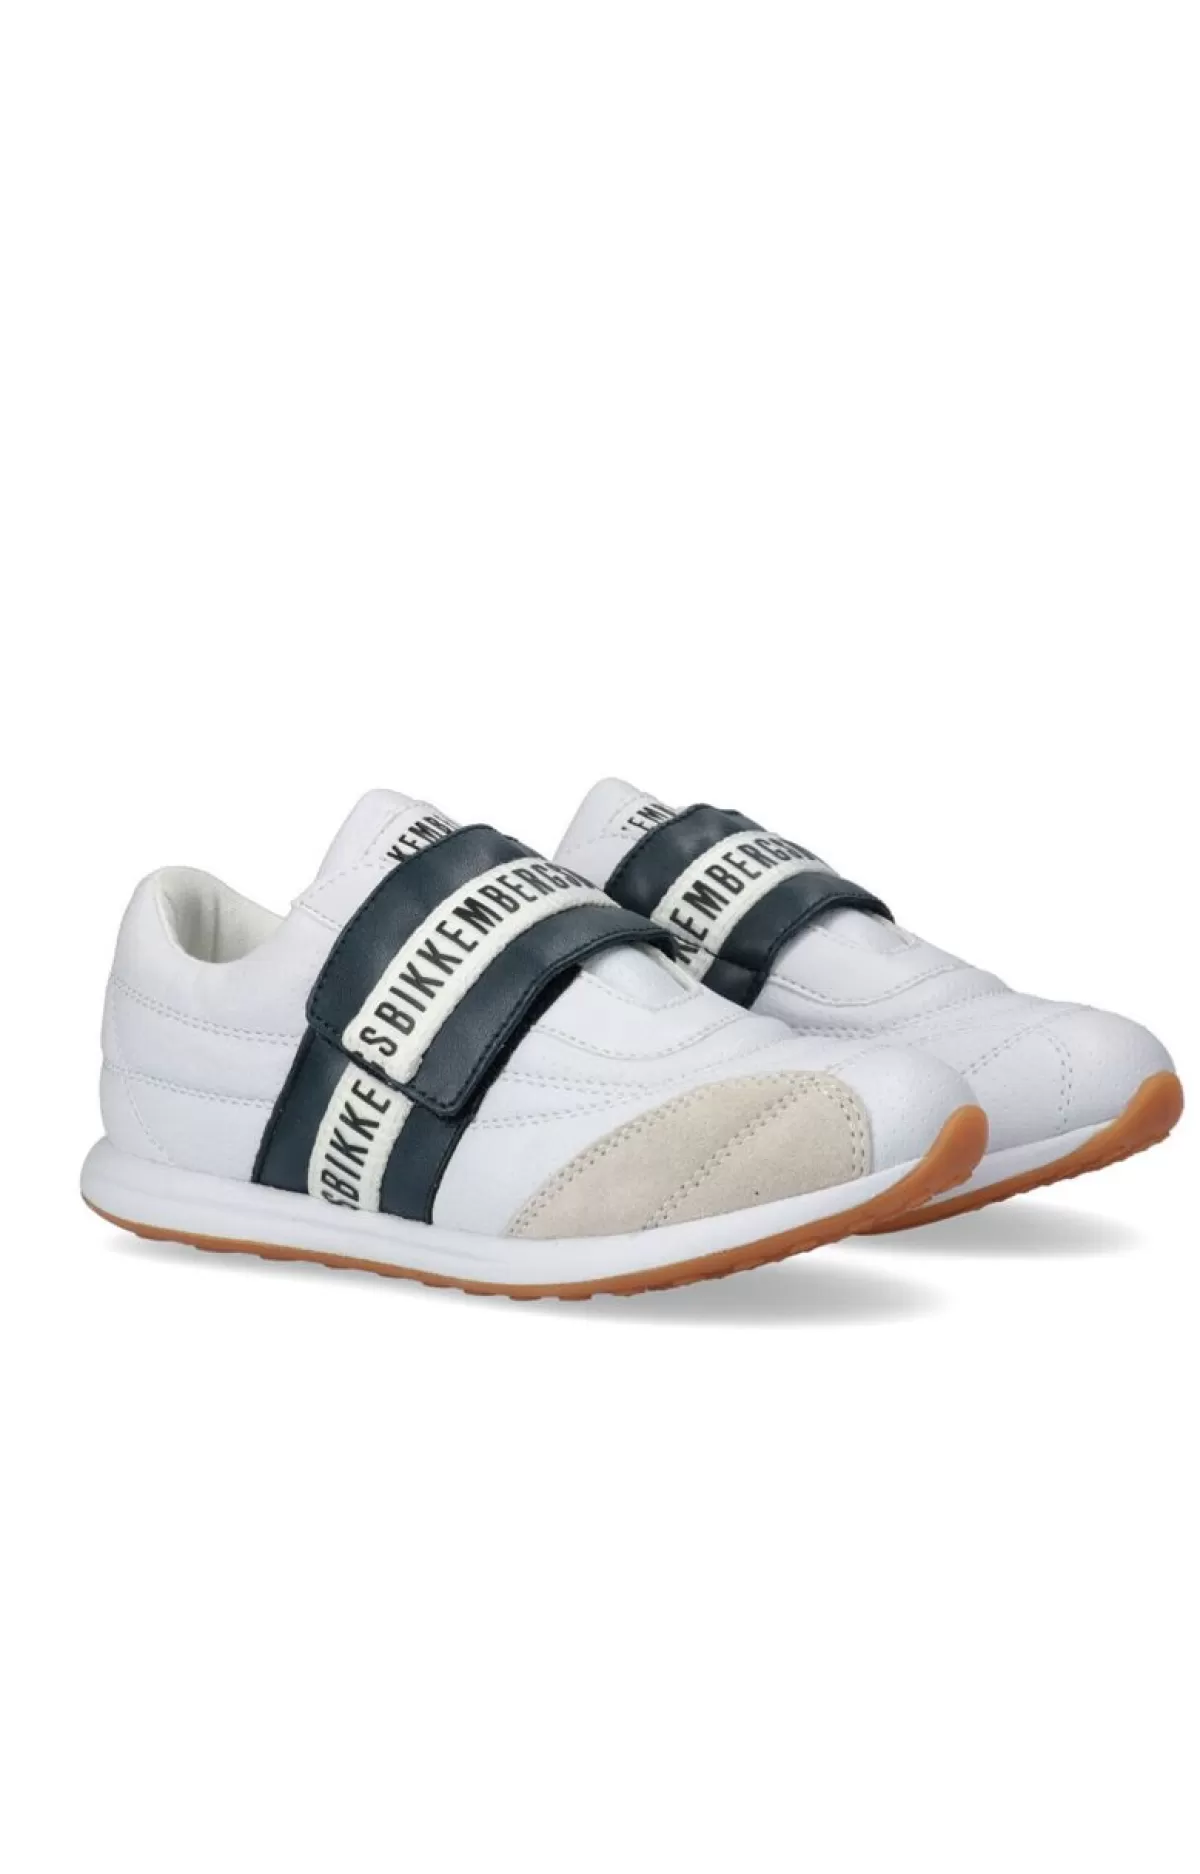 Bikkembergs Kids' Sneakers With Velcro "Evans" White/Blue Flash Sale